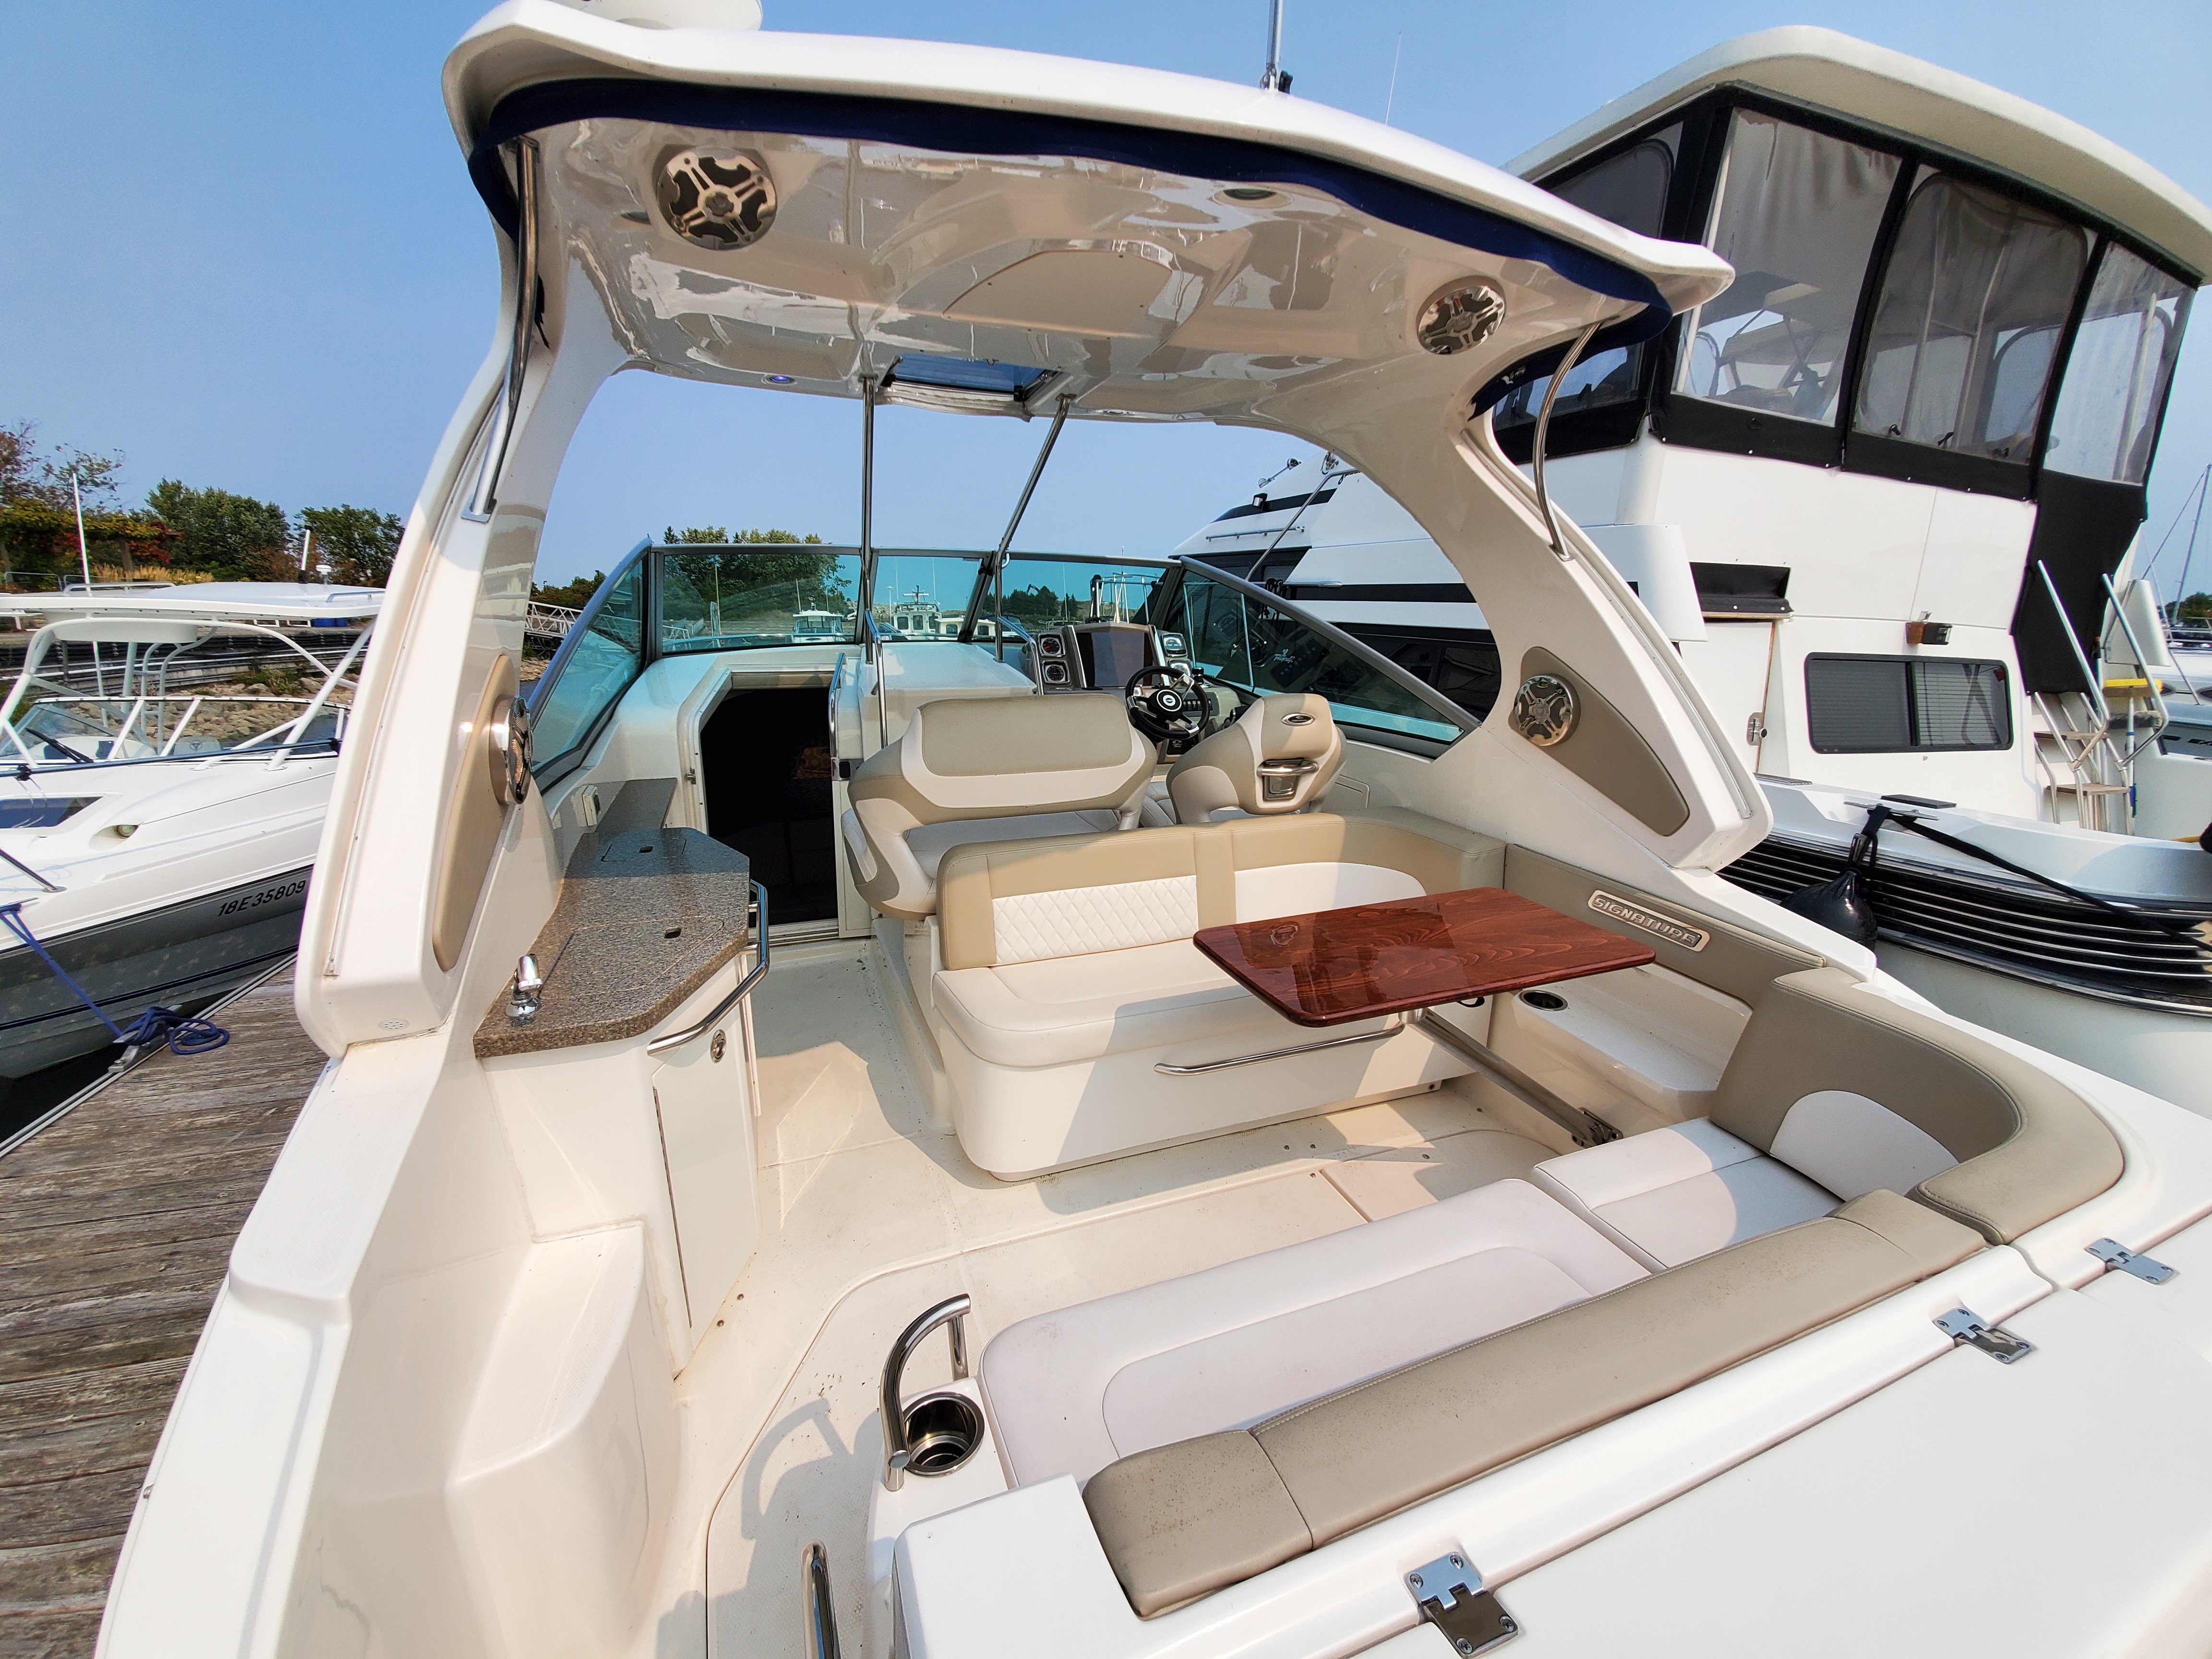 toronto yacht sales by united city yachts